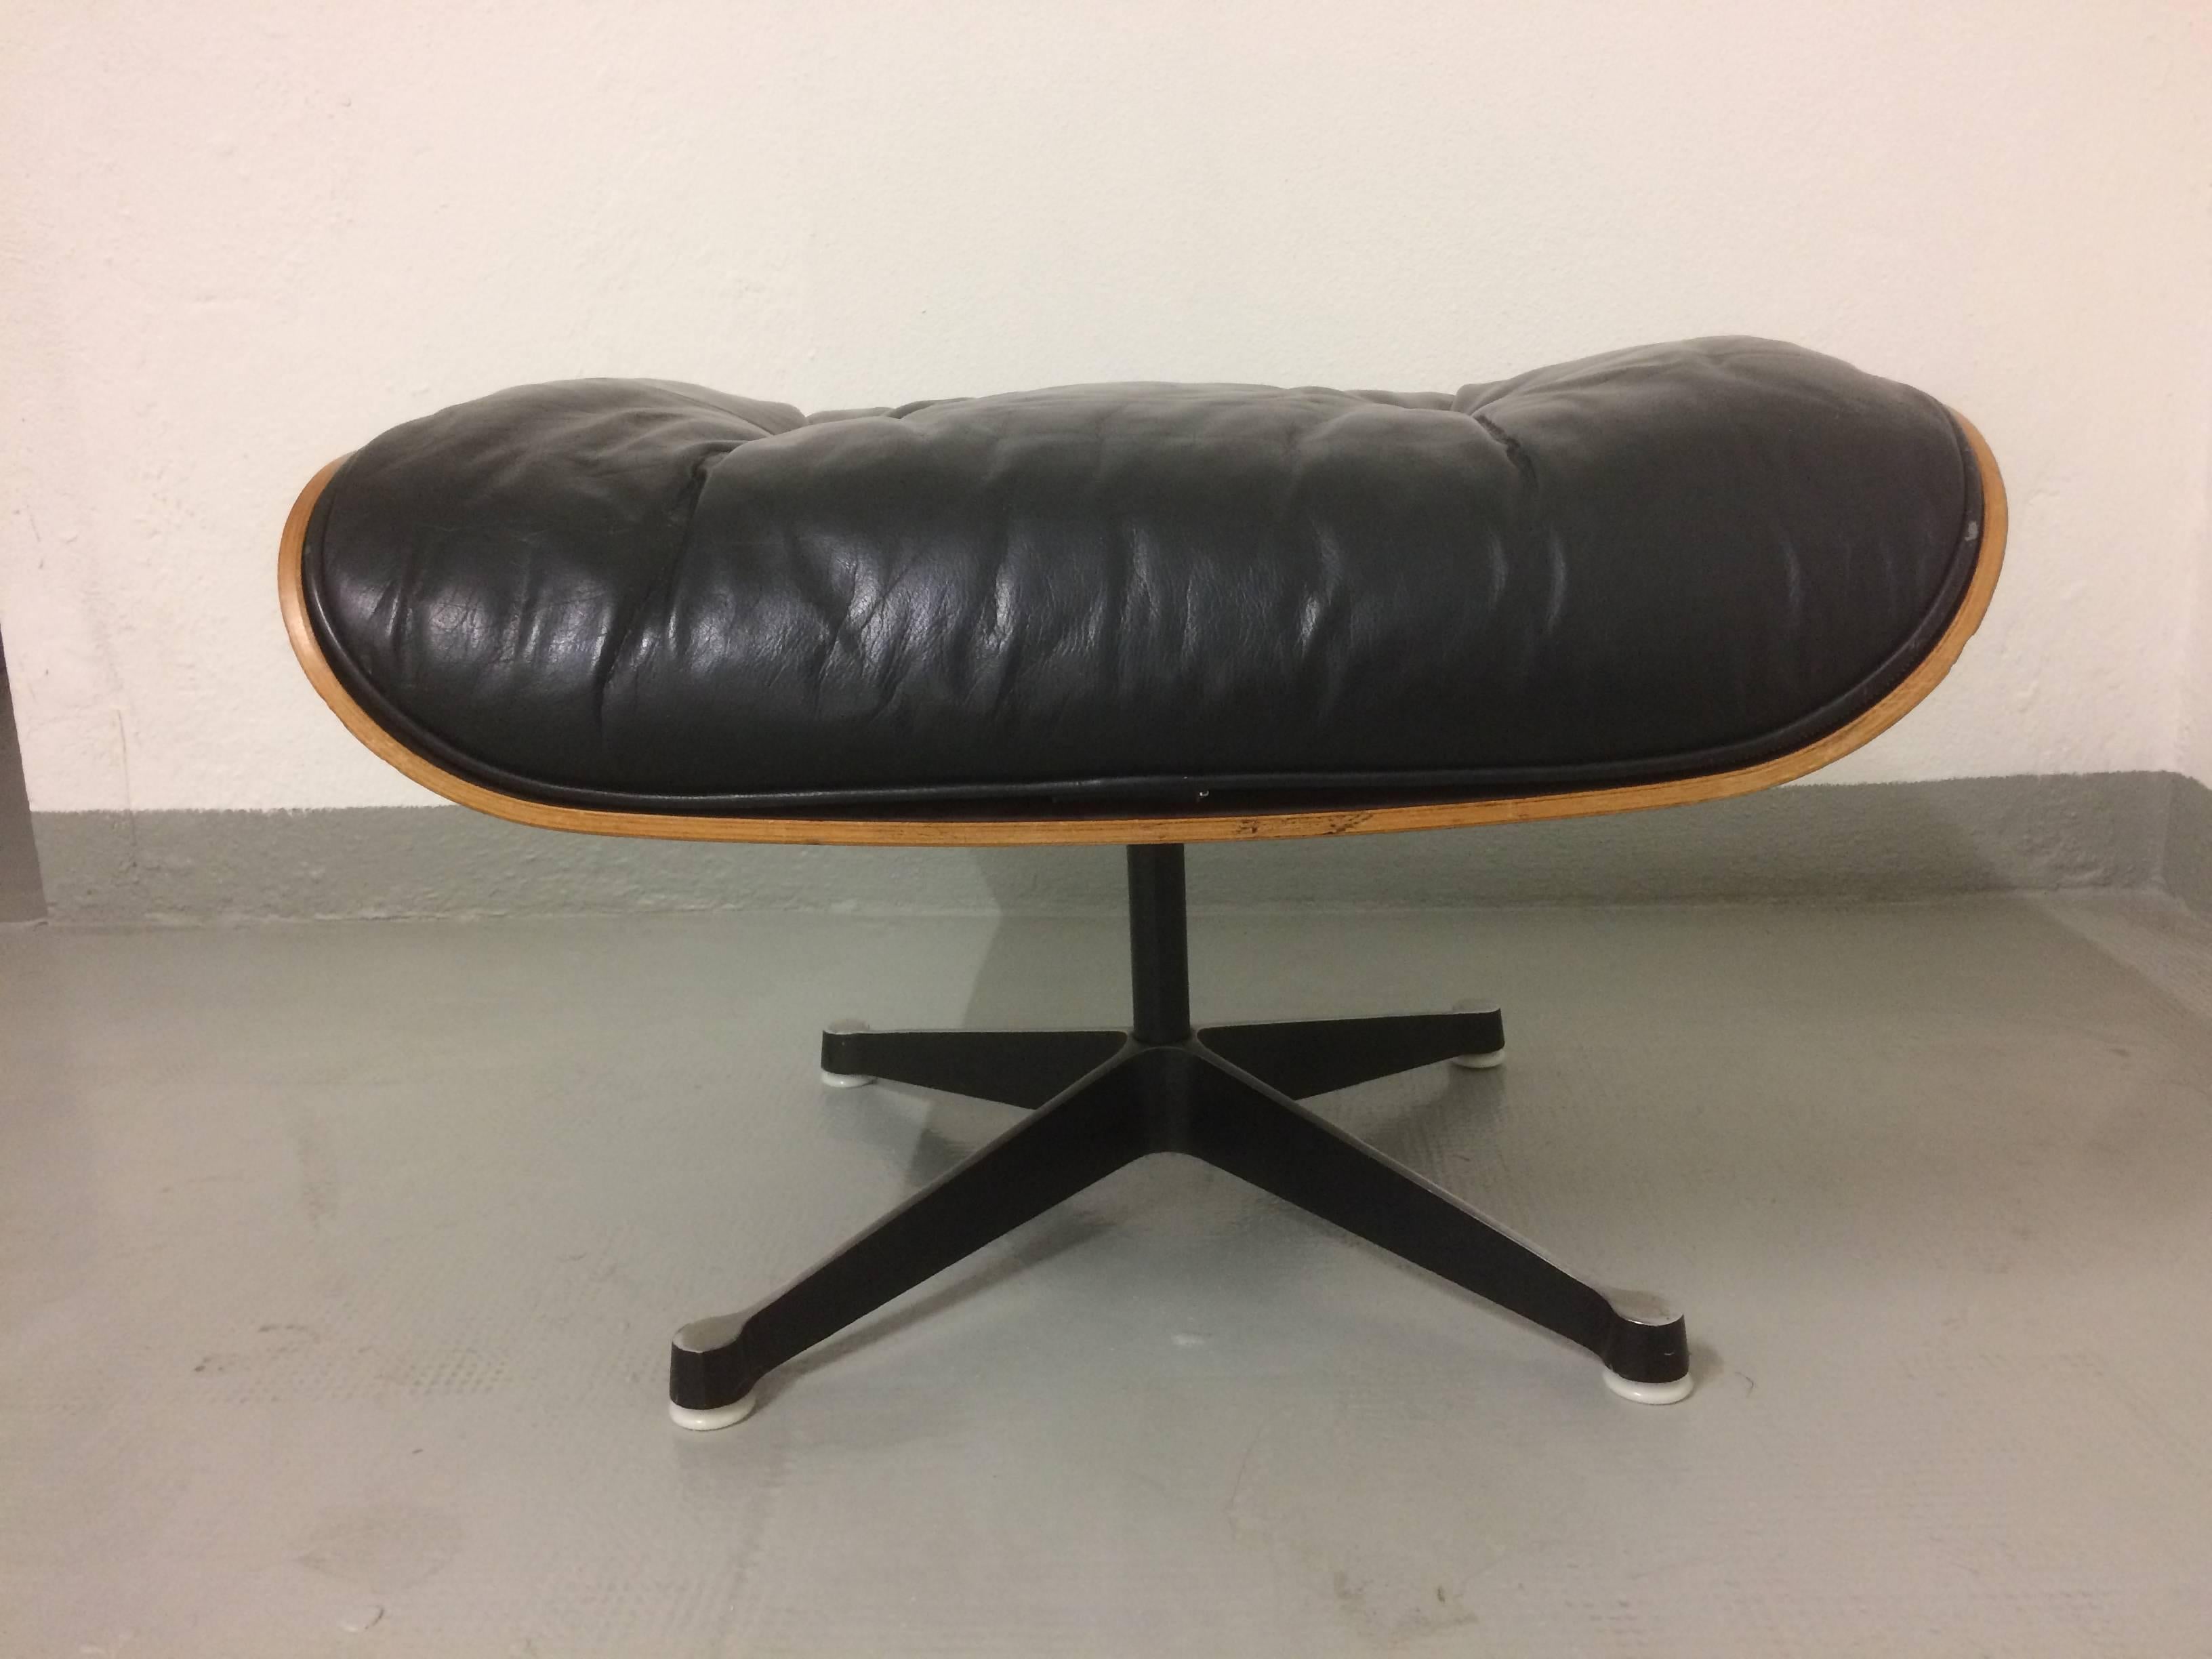 Eames lounge chair ottoman in black leather and rosewood.
Vitra edition, good condition, 2-3 chips on wood (pictures)
Duck feather.